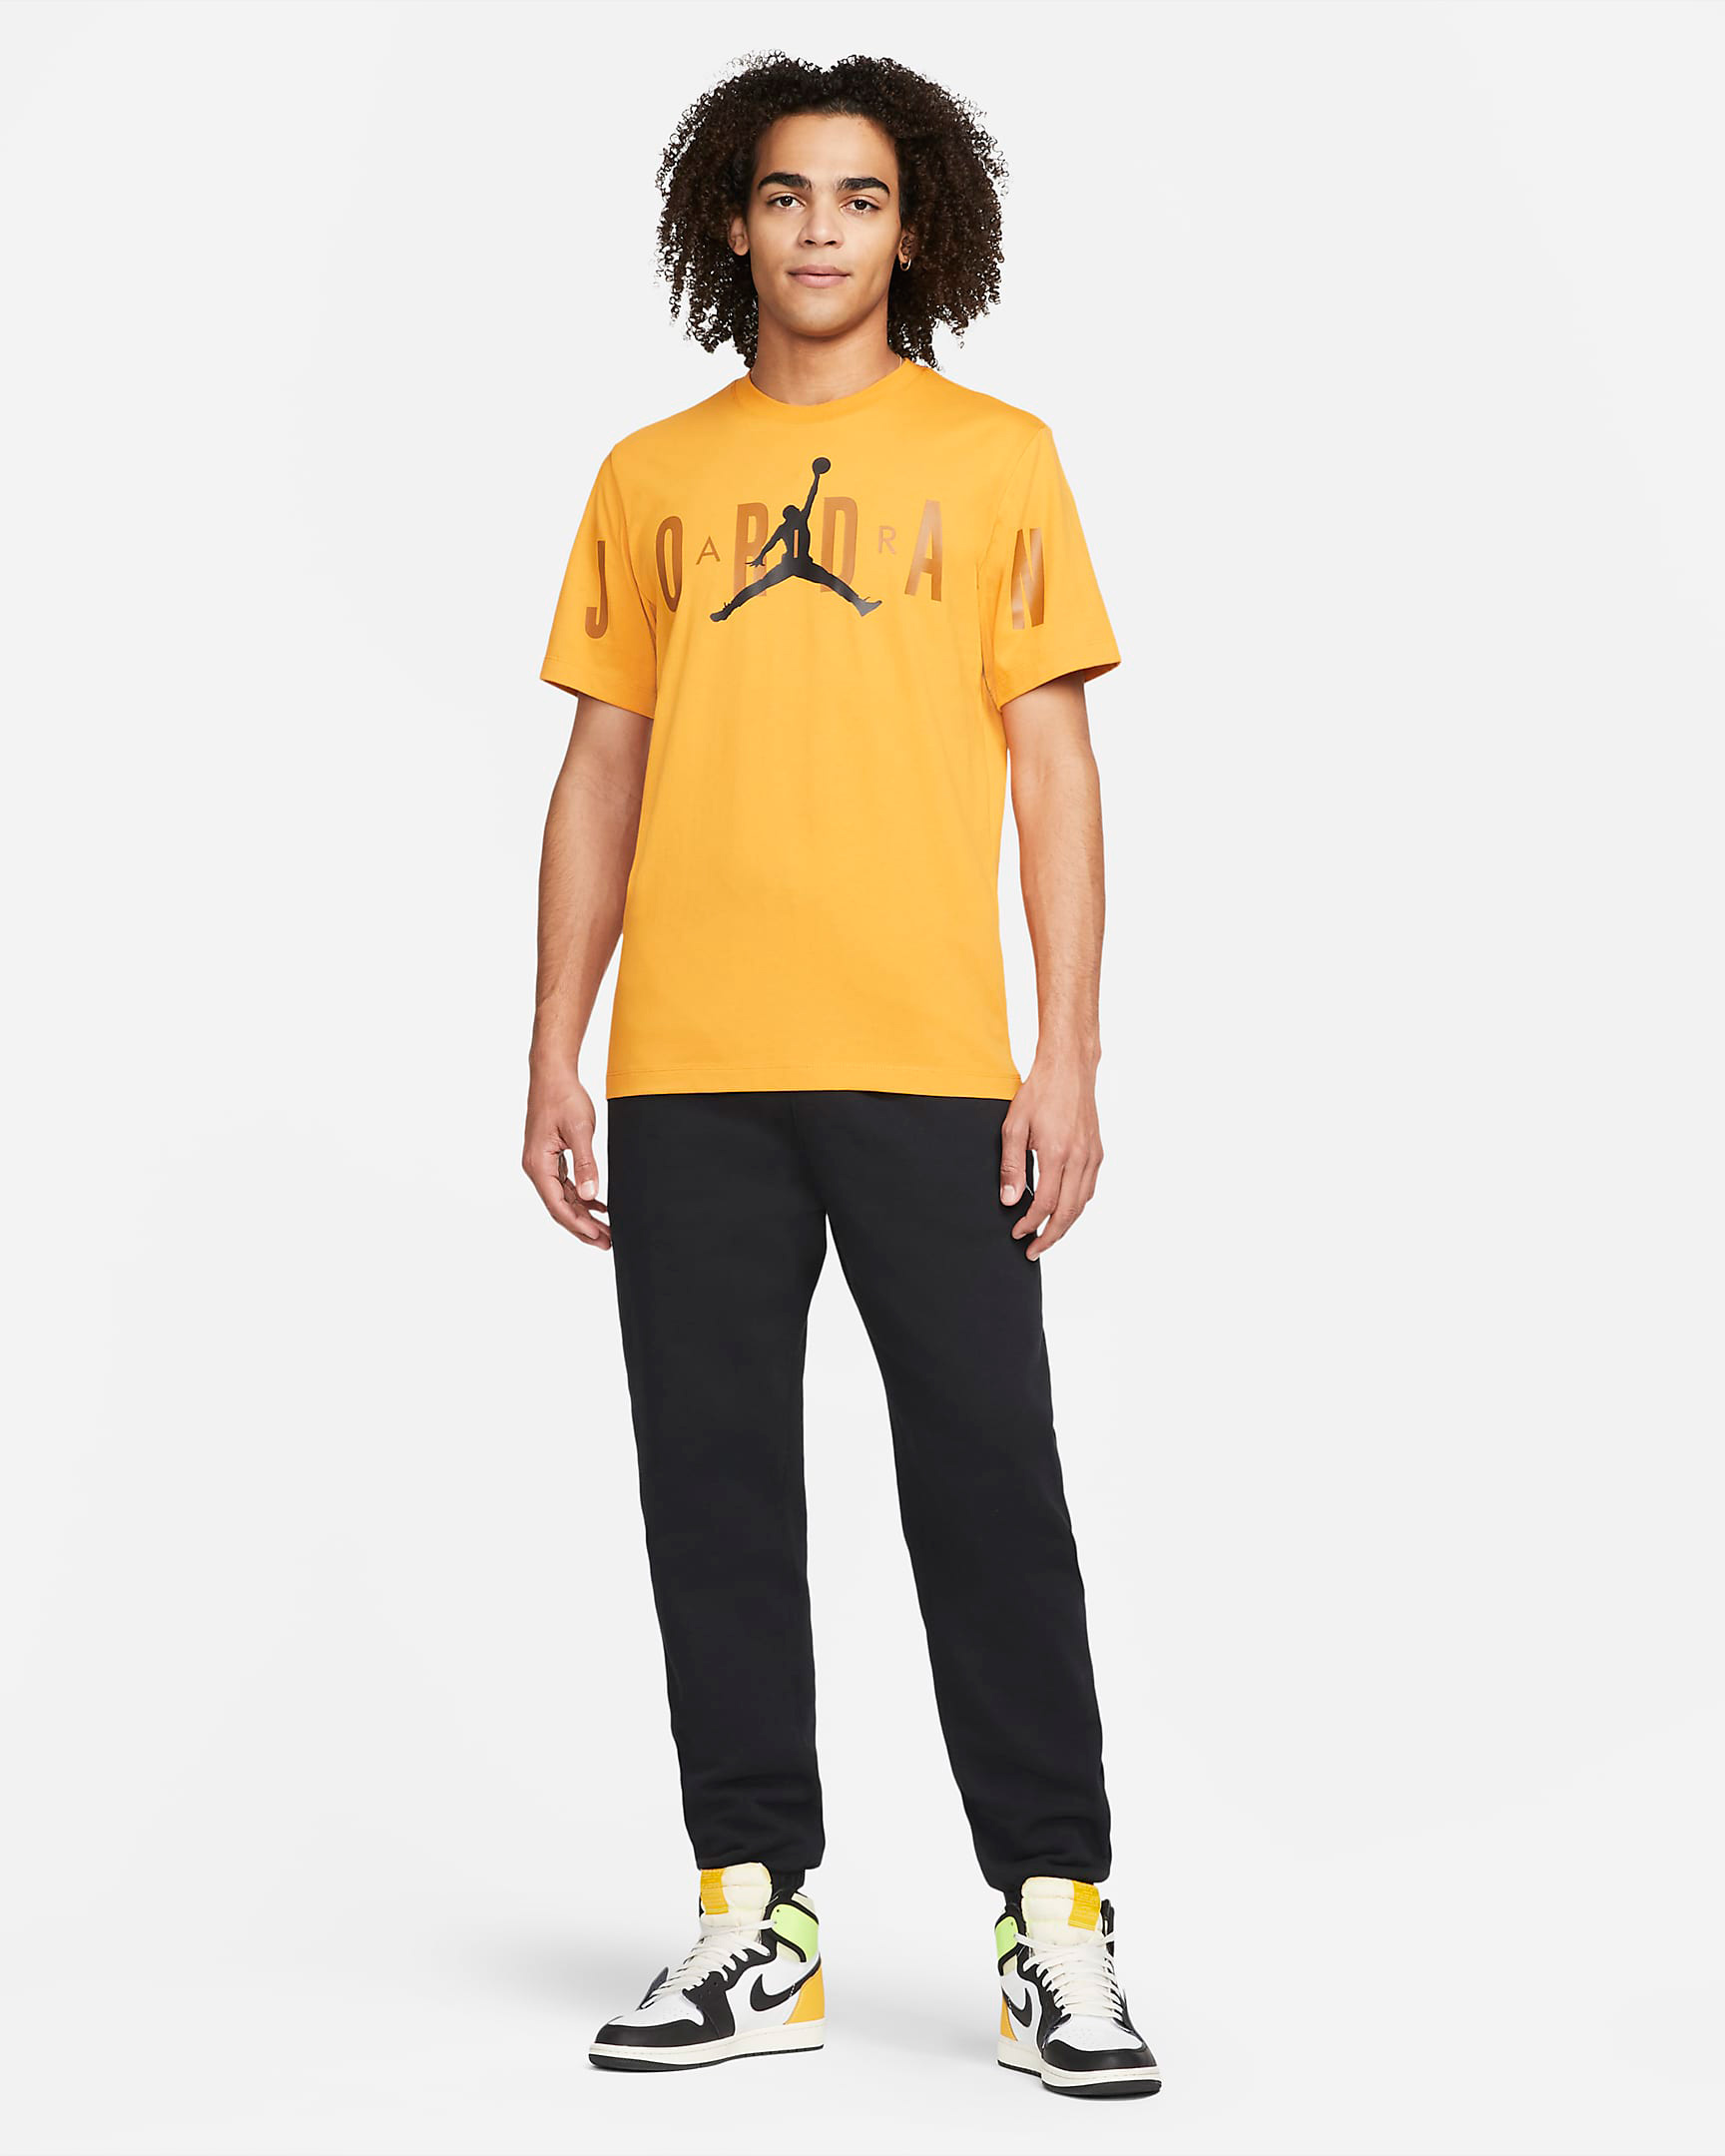 jordan-light-curry-sneaker-clothing-outfit-5